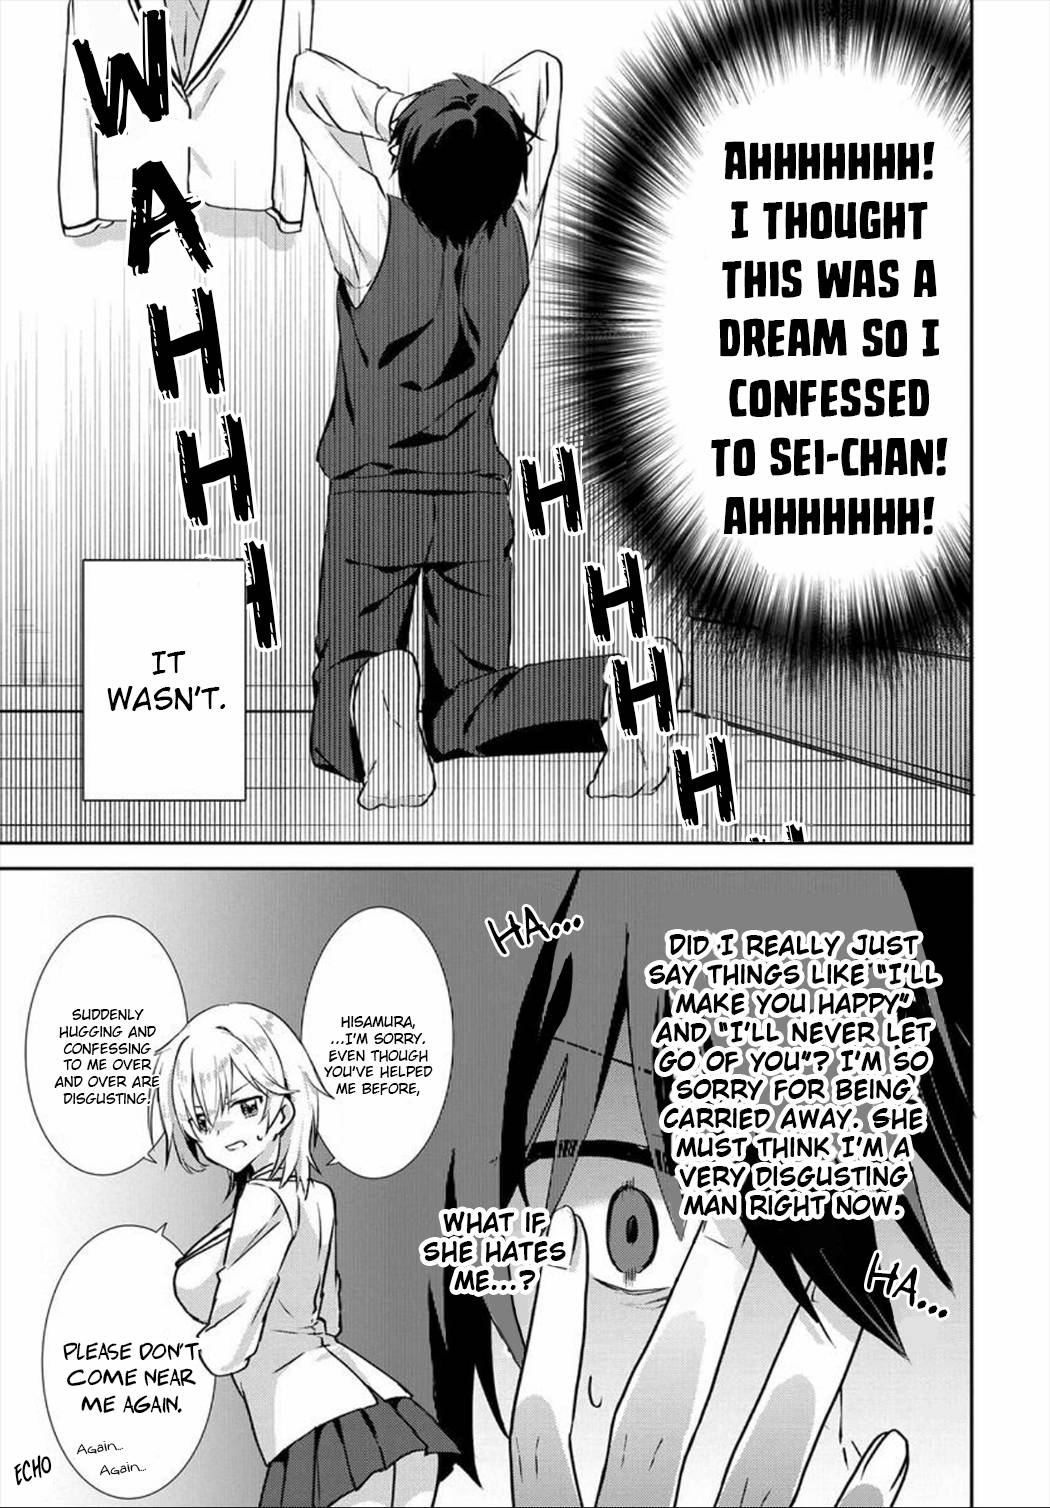 Since I’Ve Entered The World Of Romantic Comedy Manga, I’Ll Do My Best To Make The Losing Heroine Happy - chapter 2.2 - #4